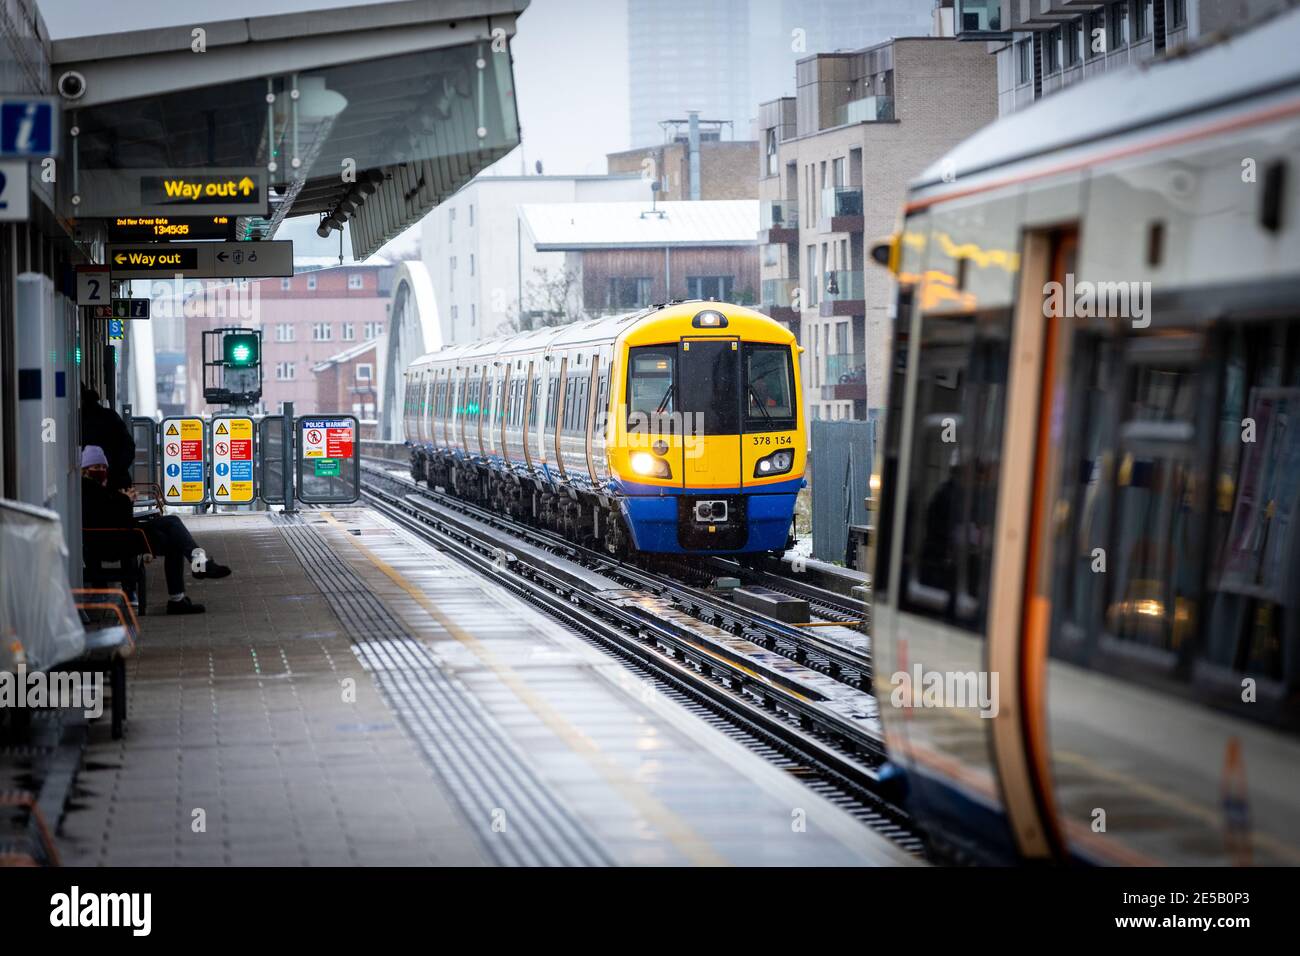 A Overground train approaches Haggerston station on a cold snowy day. Stock Photo